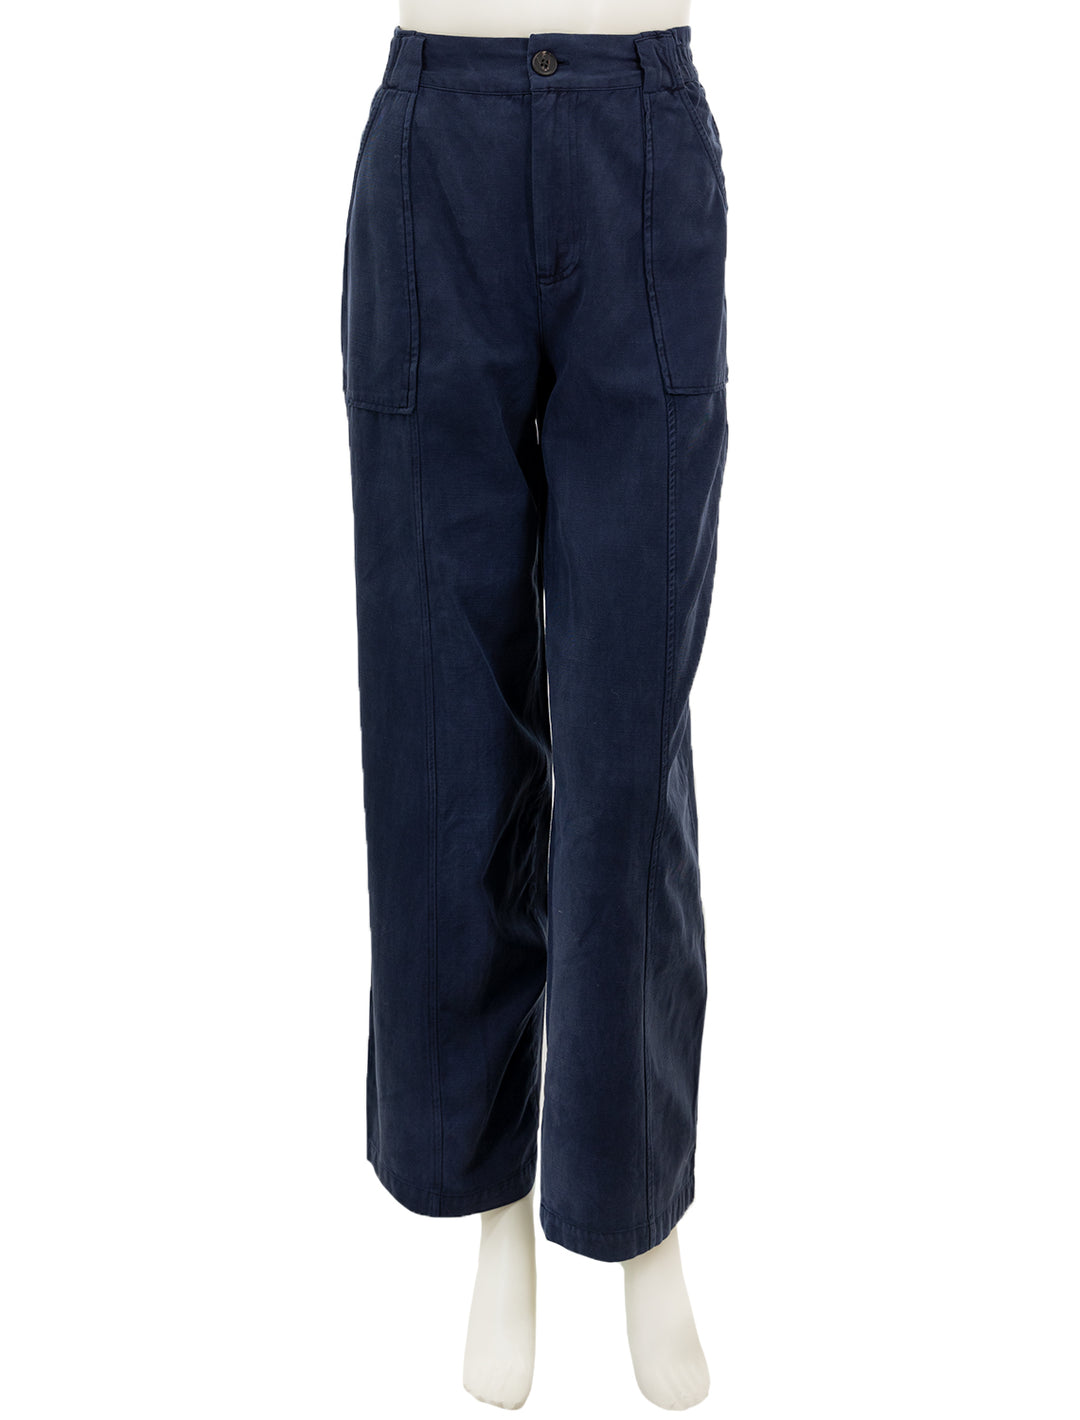 Front view of Rails' greer pant in navy.